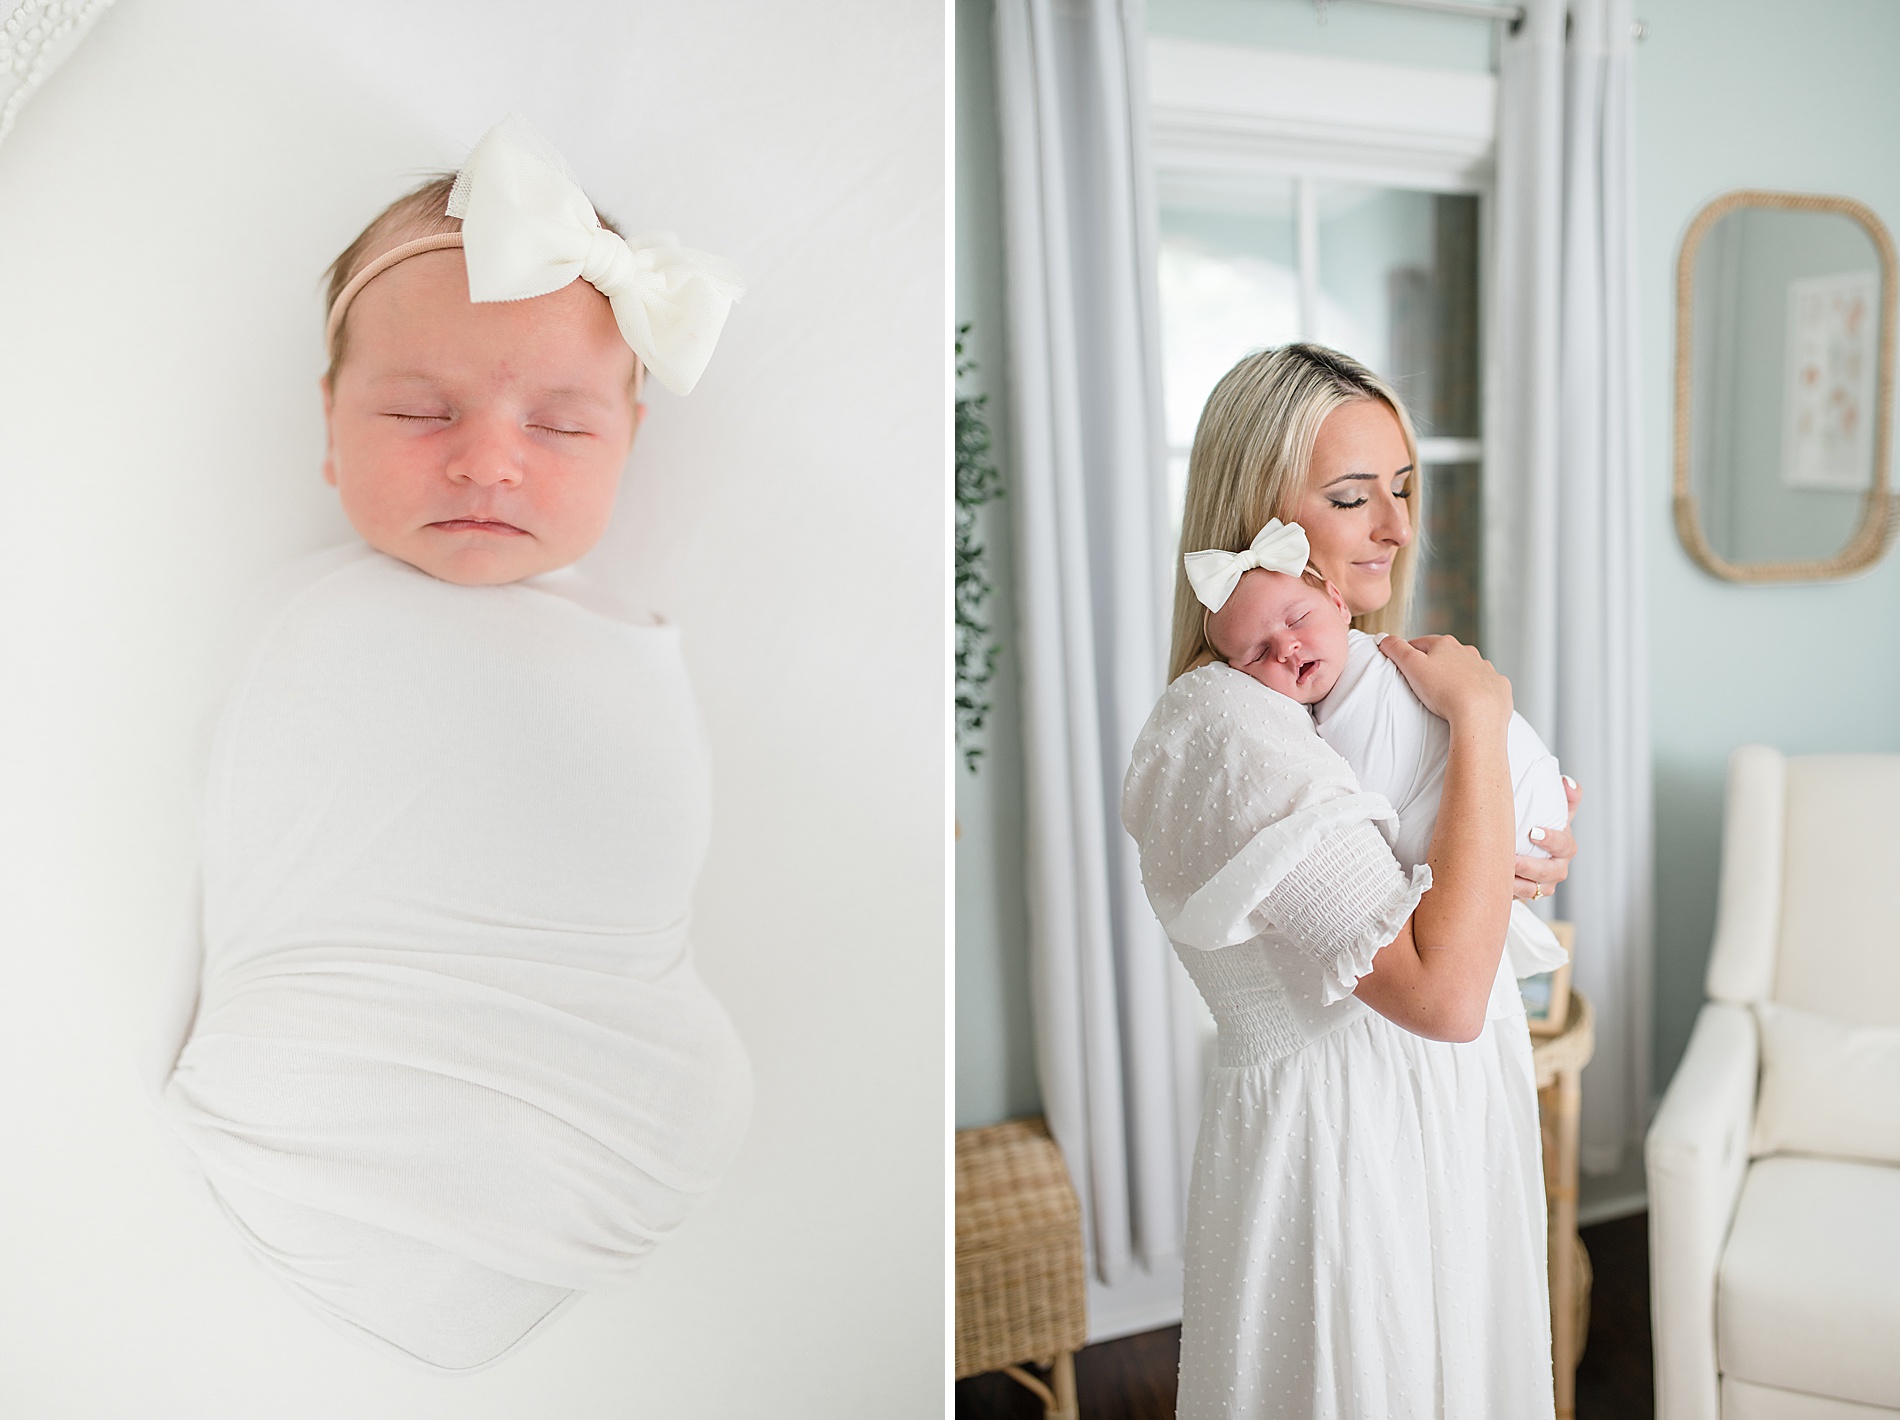 newborn girl swaddled in white with mom during newborn session taken by Lindsey Dutton Photography, a Dallas Newborn Photographer